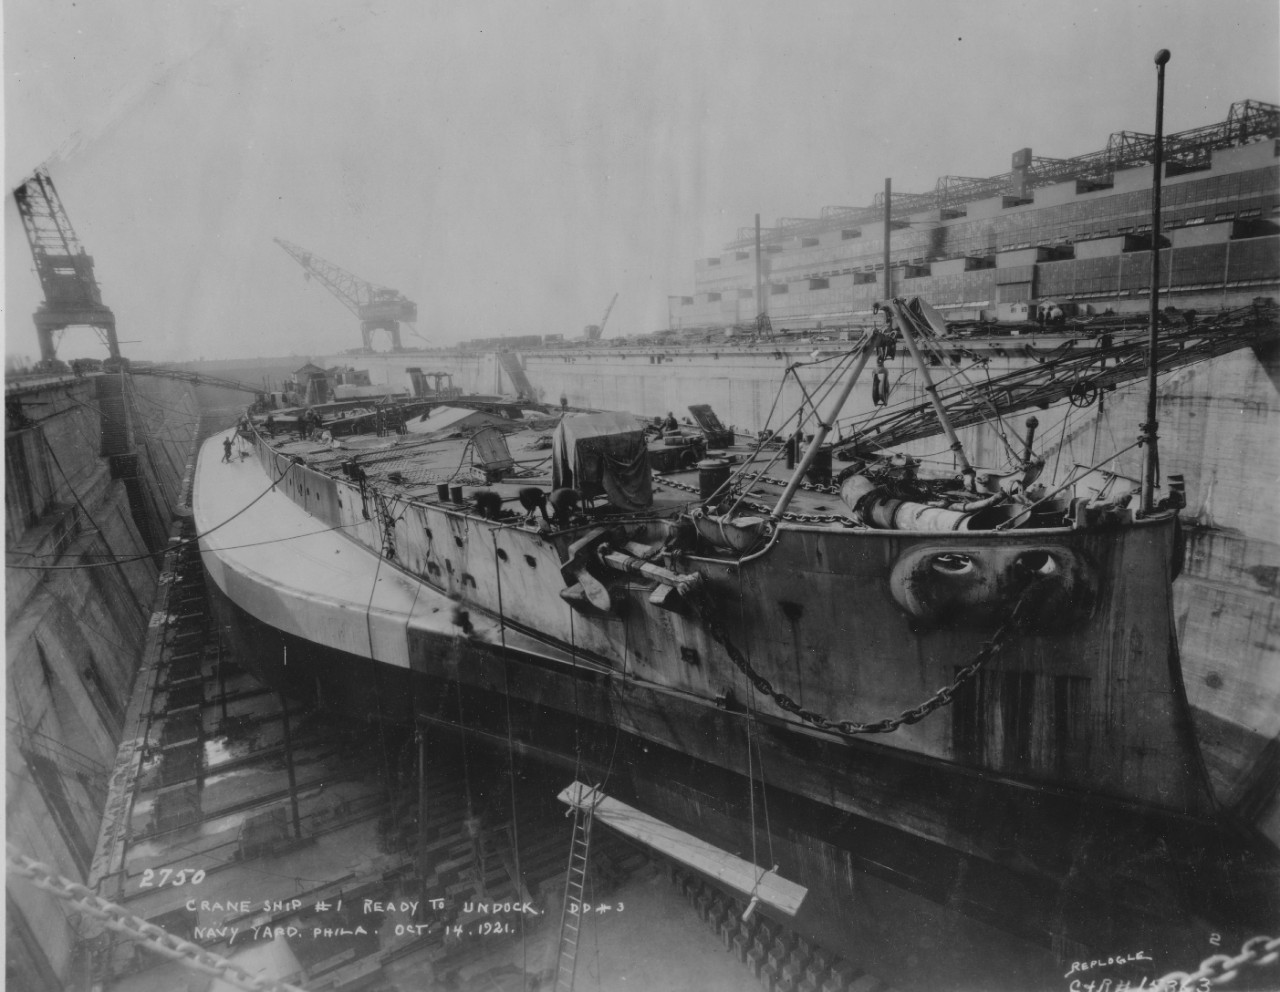 Stripped of turrets, superstructure, and armor, Crane Ship No. 1 is prepared for undocking from Dry Dock No. 3 at the Philadelphia Navy Yard, 14 October 1921. (U.S. Navy Bureau of Ships Photograph 19-N-15363, National Archives and Records Adminis...